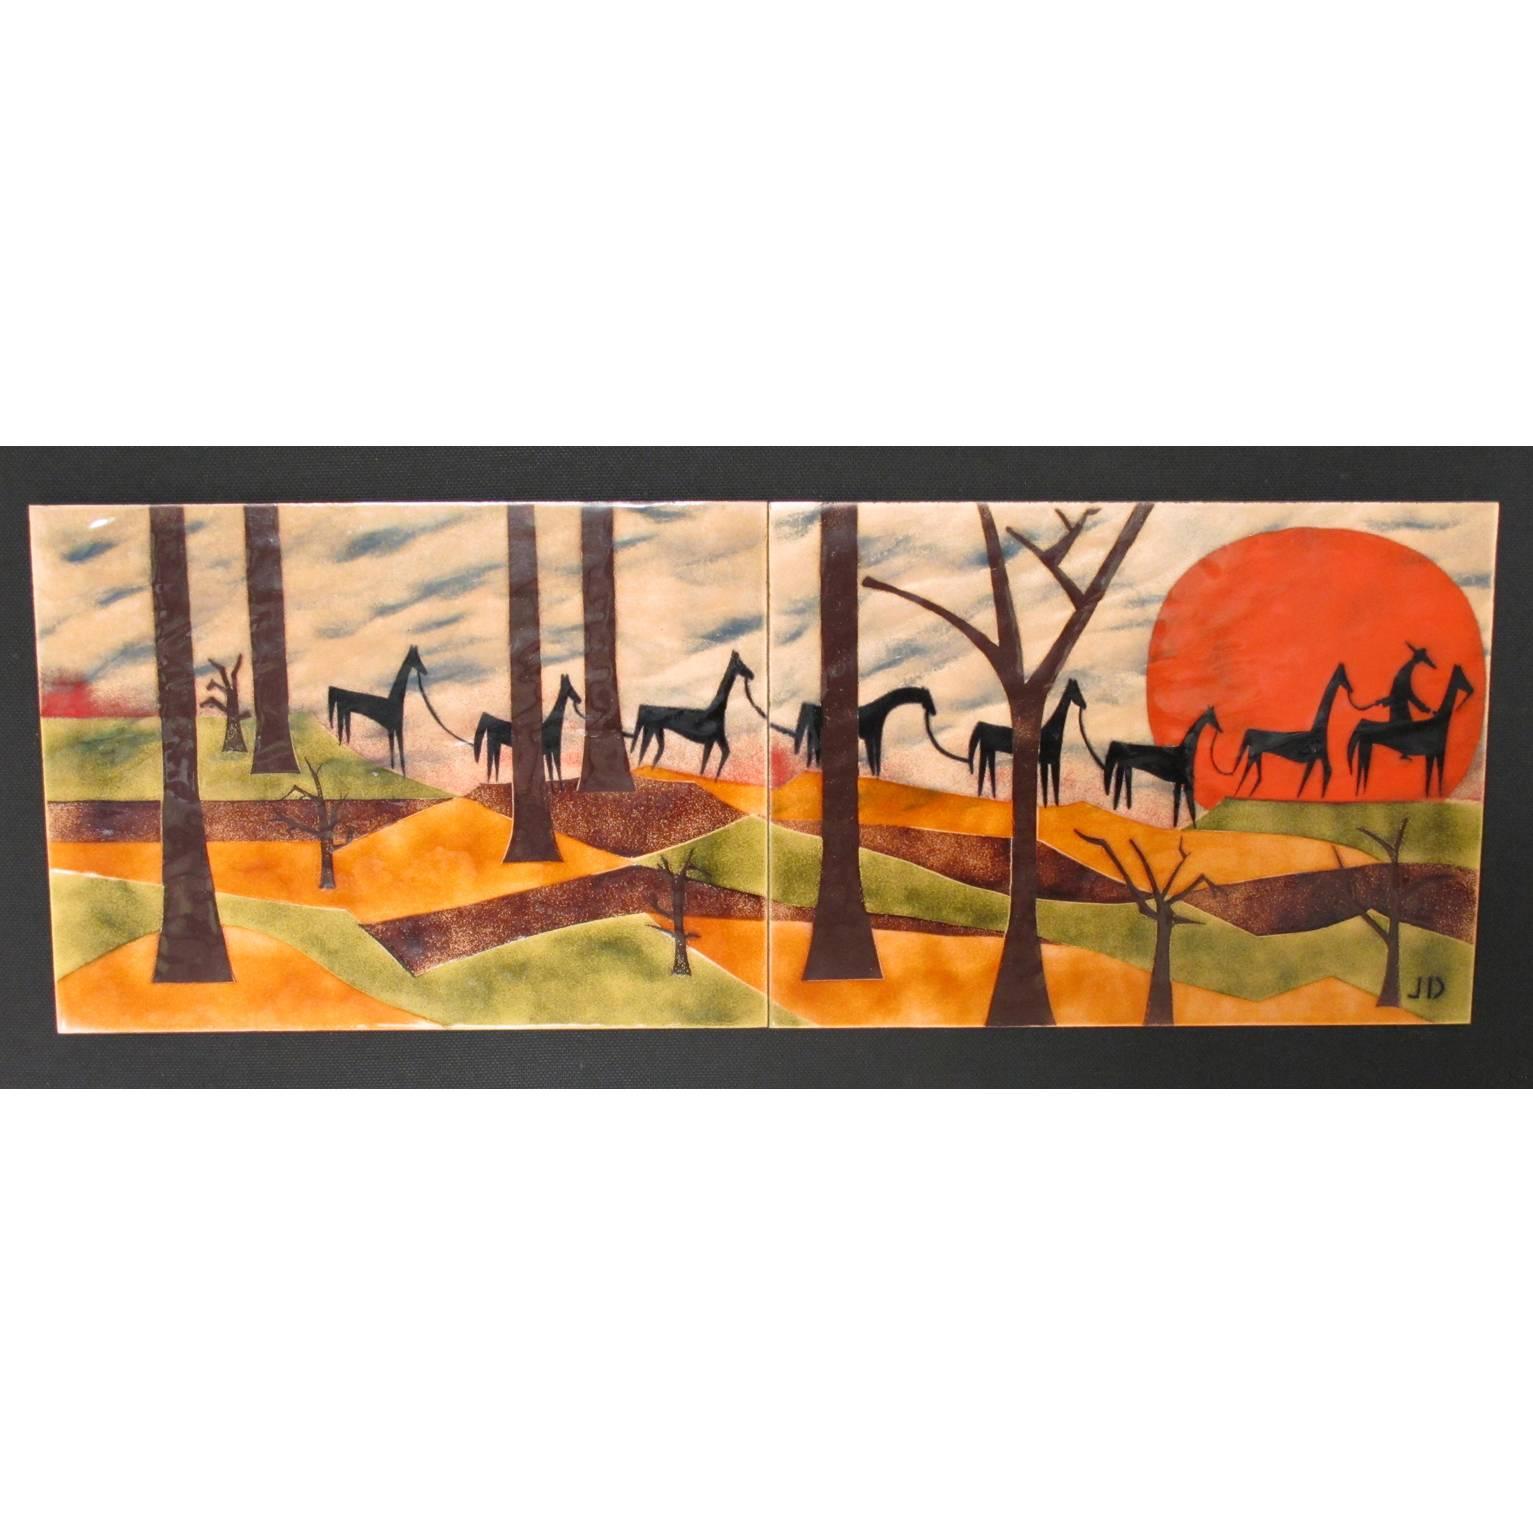 Stunning Mid-Century modernist enamel on copper artwork by Judith Daner. Two tile plaques mounted together on original oakwood frame with black fabric large matte. Abstract and stylized design featuring horses on the trail, Judith Daner used the